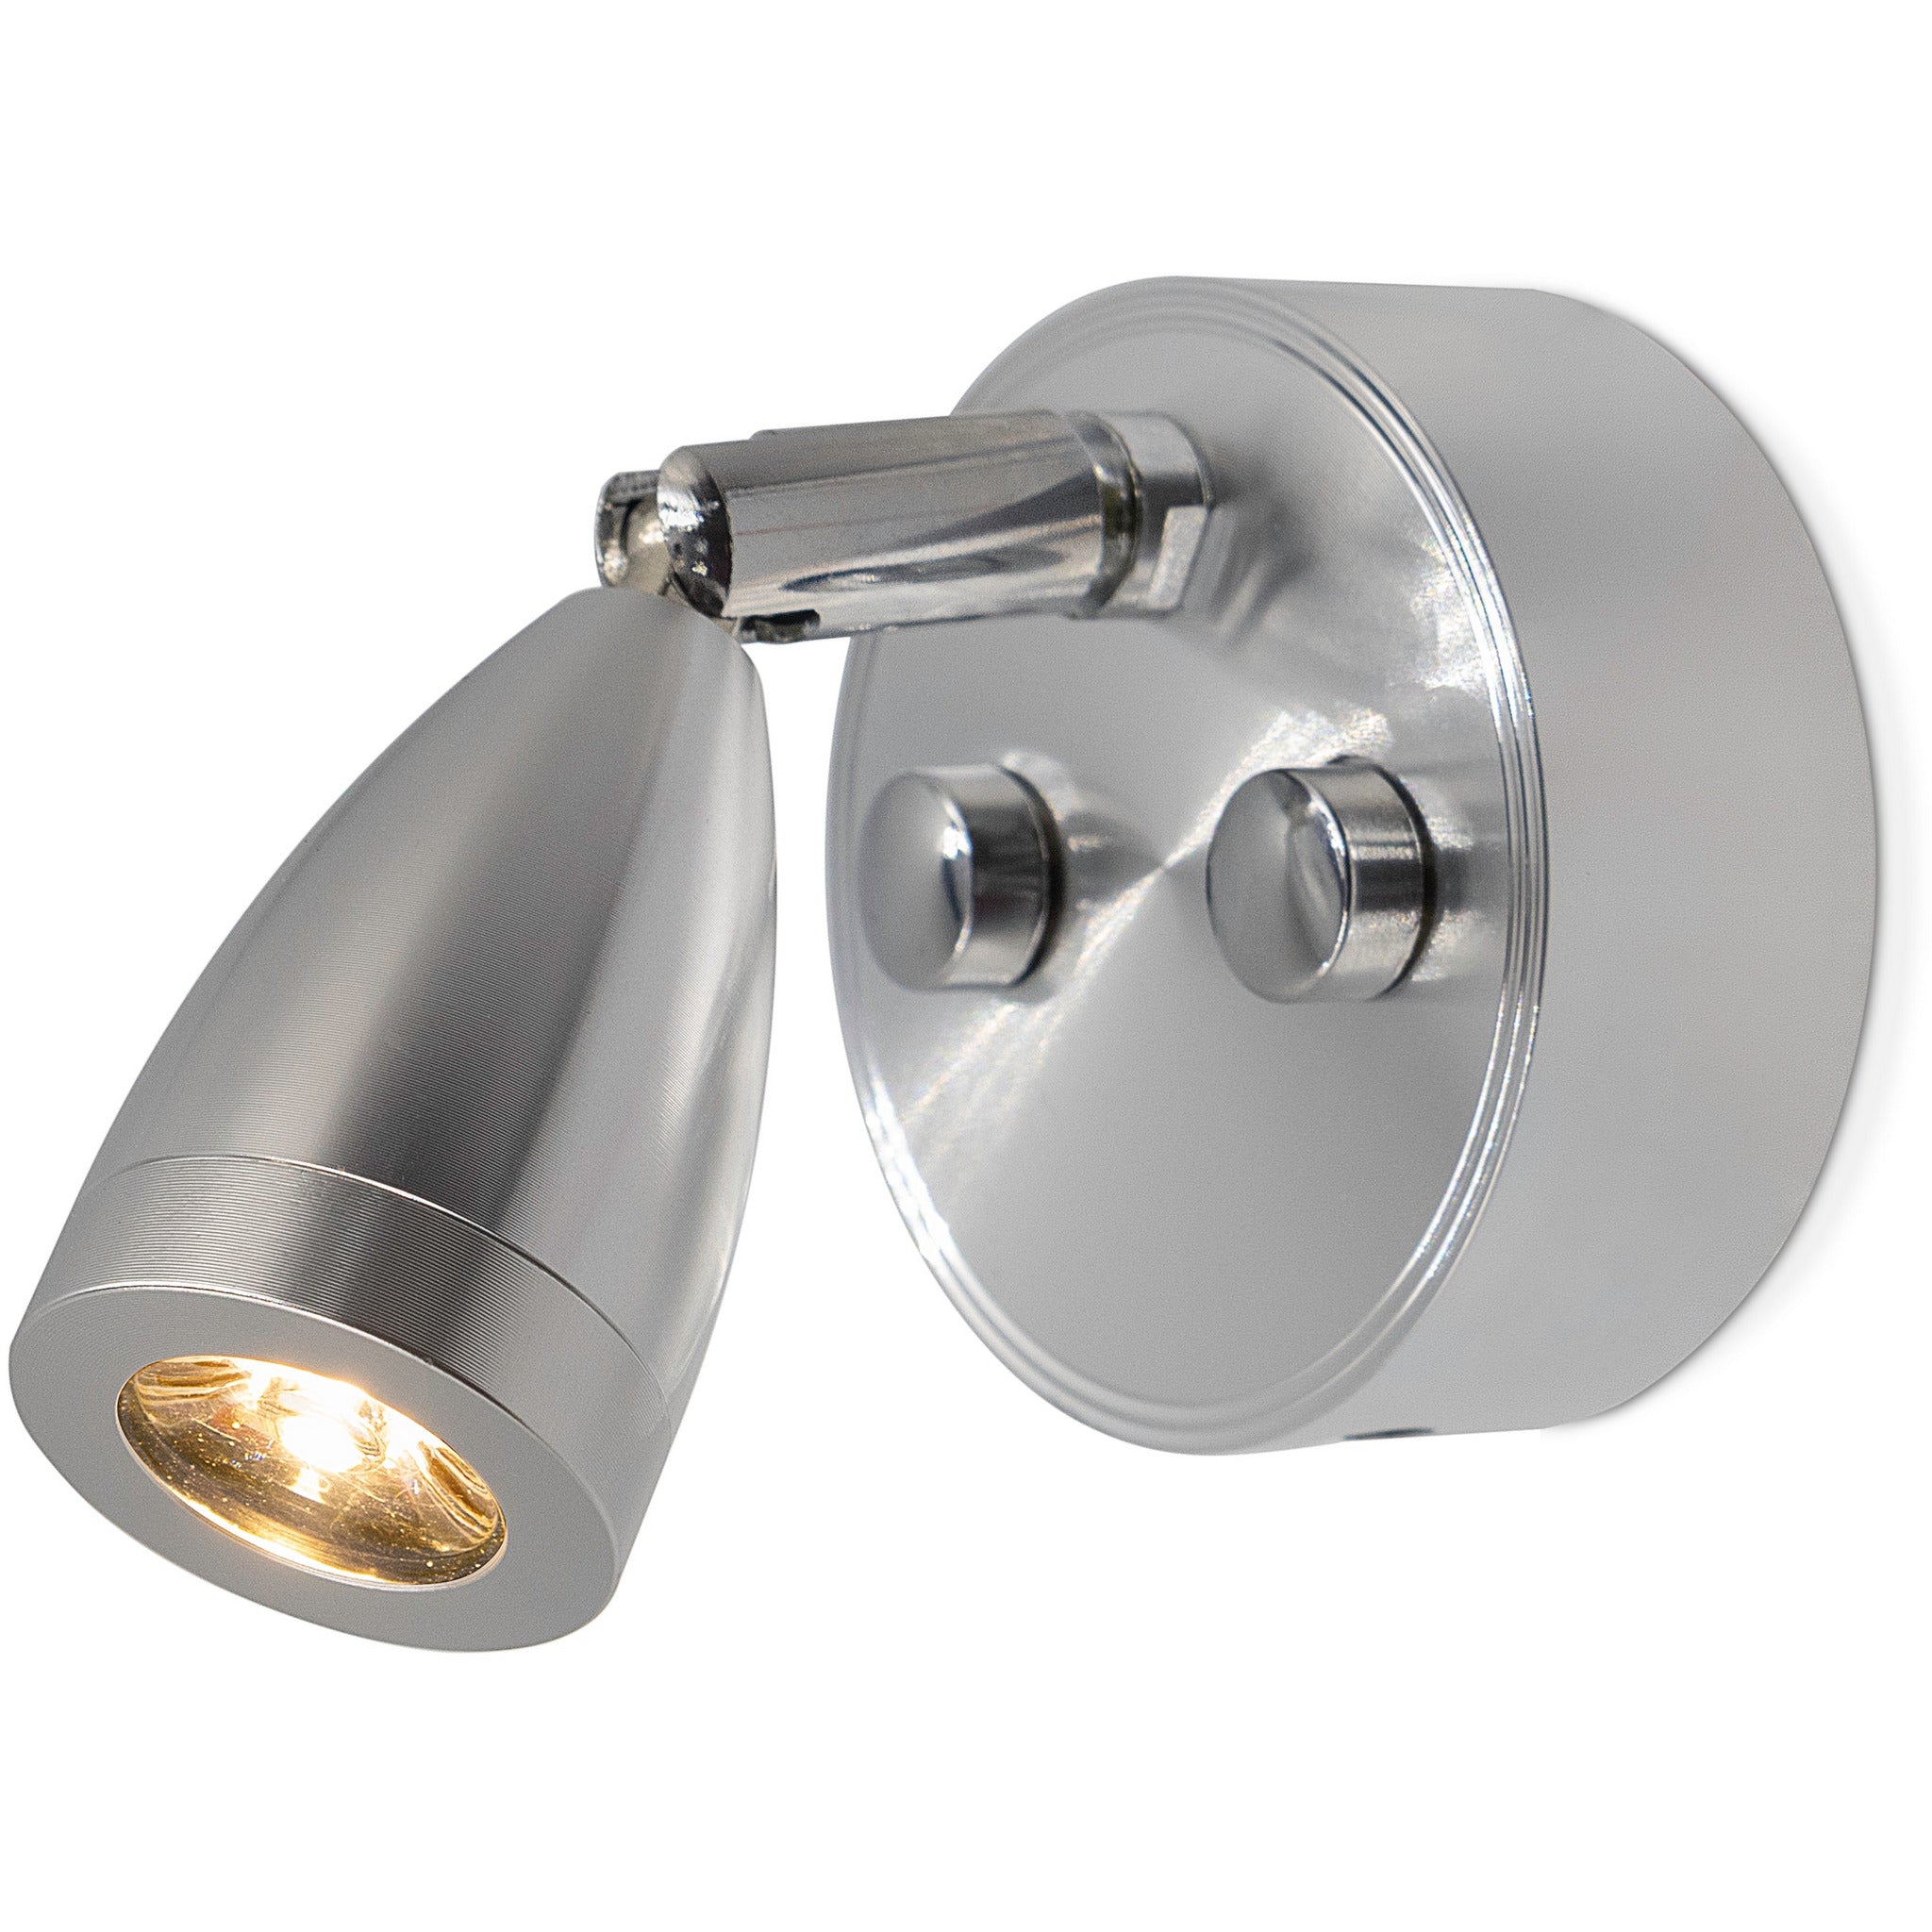 Silver LED 280mm Spotlight with USB - Dimmable, Touch On/Off (Warm White) Kiravans 